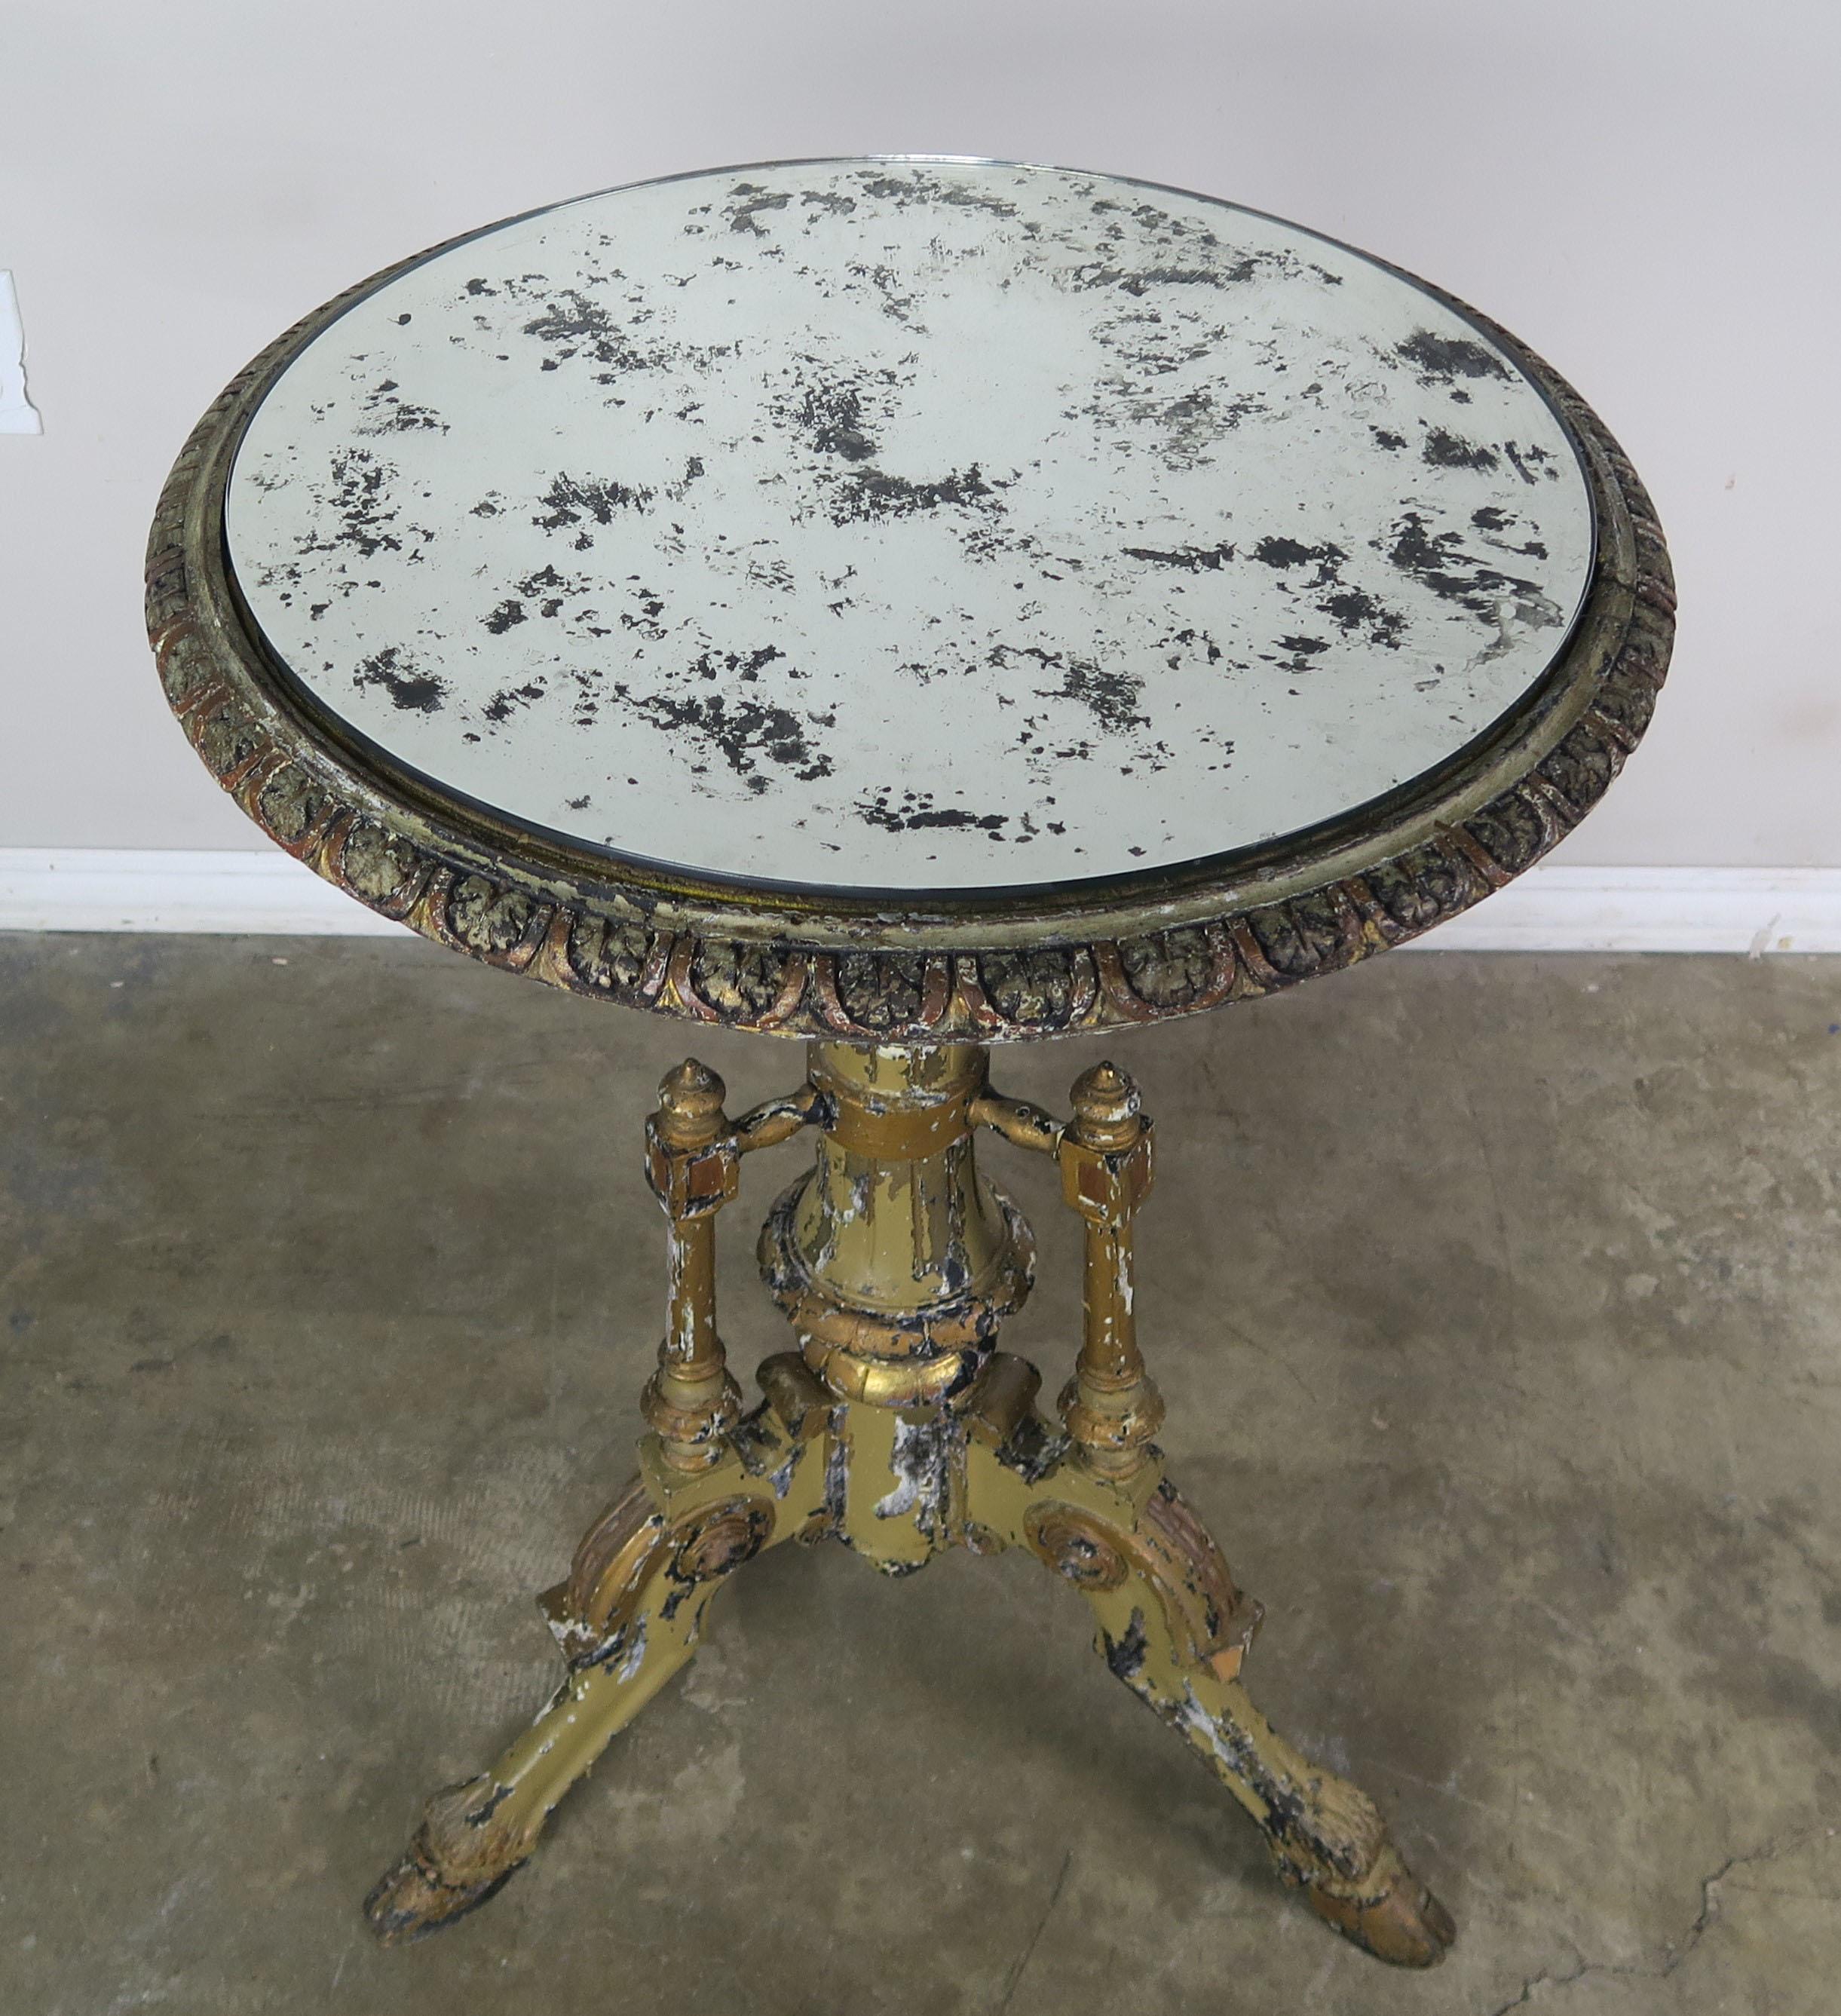 French painted side table with an antiqued mirrored top. The table stands on a tripod base with three legs ending in carved hoofs. The table has a beautifully carved apron on it's top that holds a great antique mirrored top.